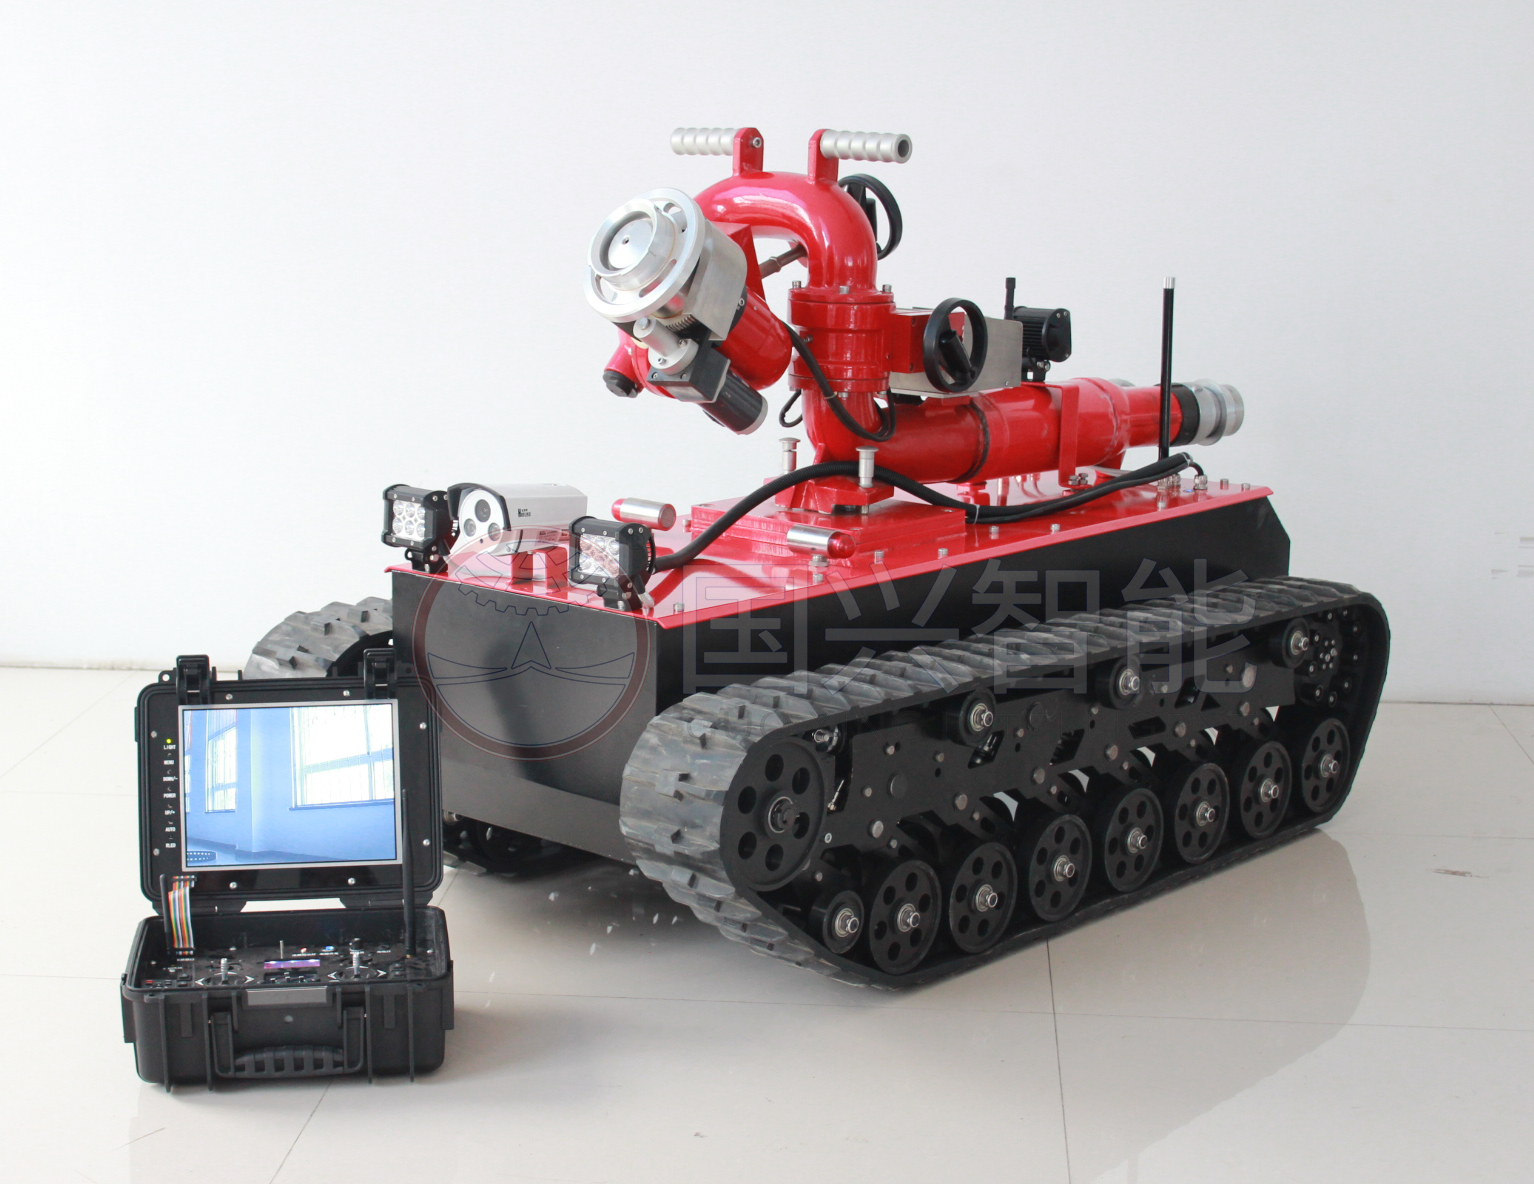 Guoxing FIrefighting Robot will be soon in Mexico Fire Brigade 4